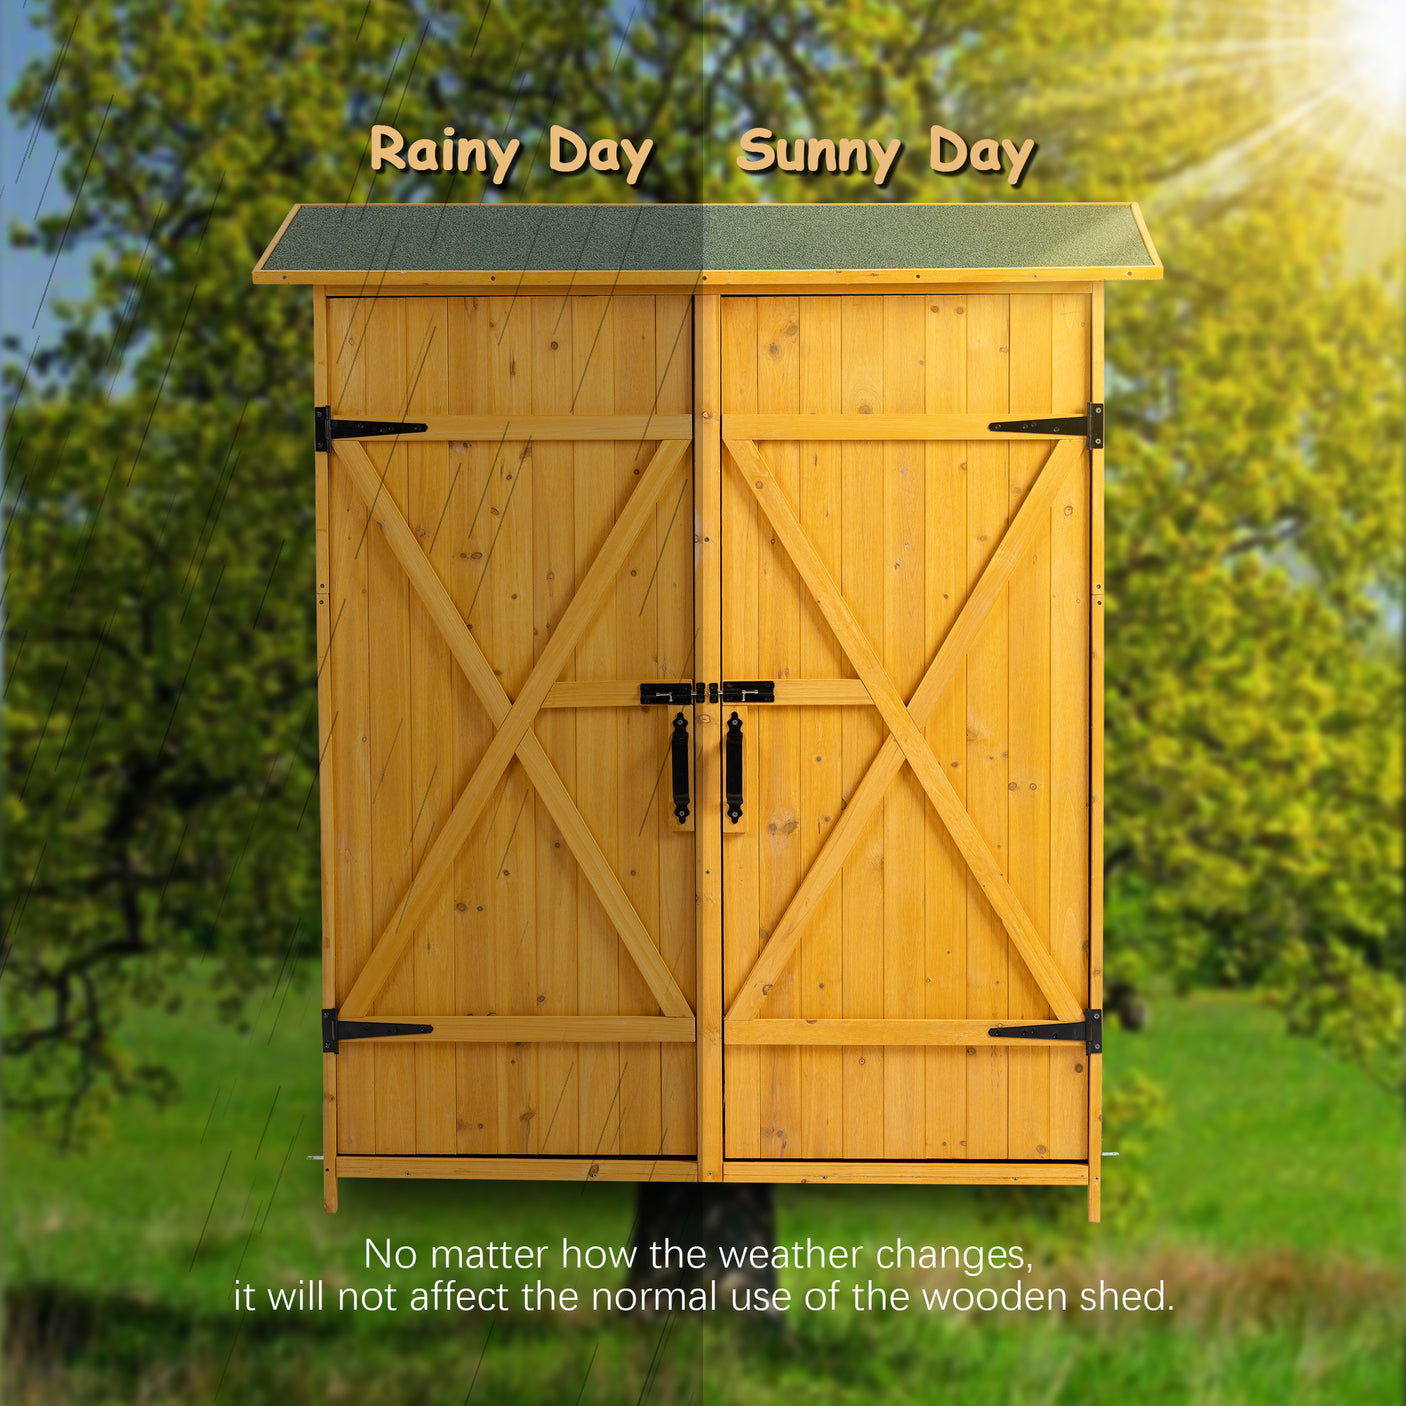 56”L x 19.5”W x 64”H Outdoor Storage Shed with Lockable Door, Wooden Tool Storage Shed w/Detachable Shelves & Pitch Roof, Natural